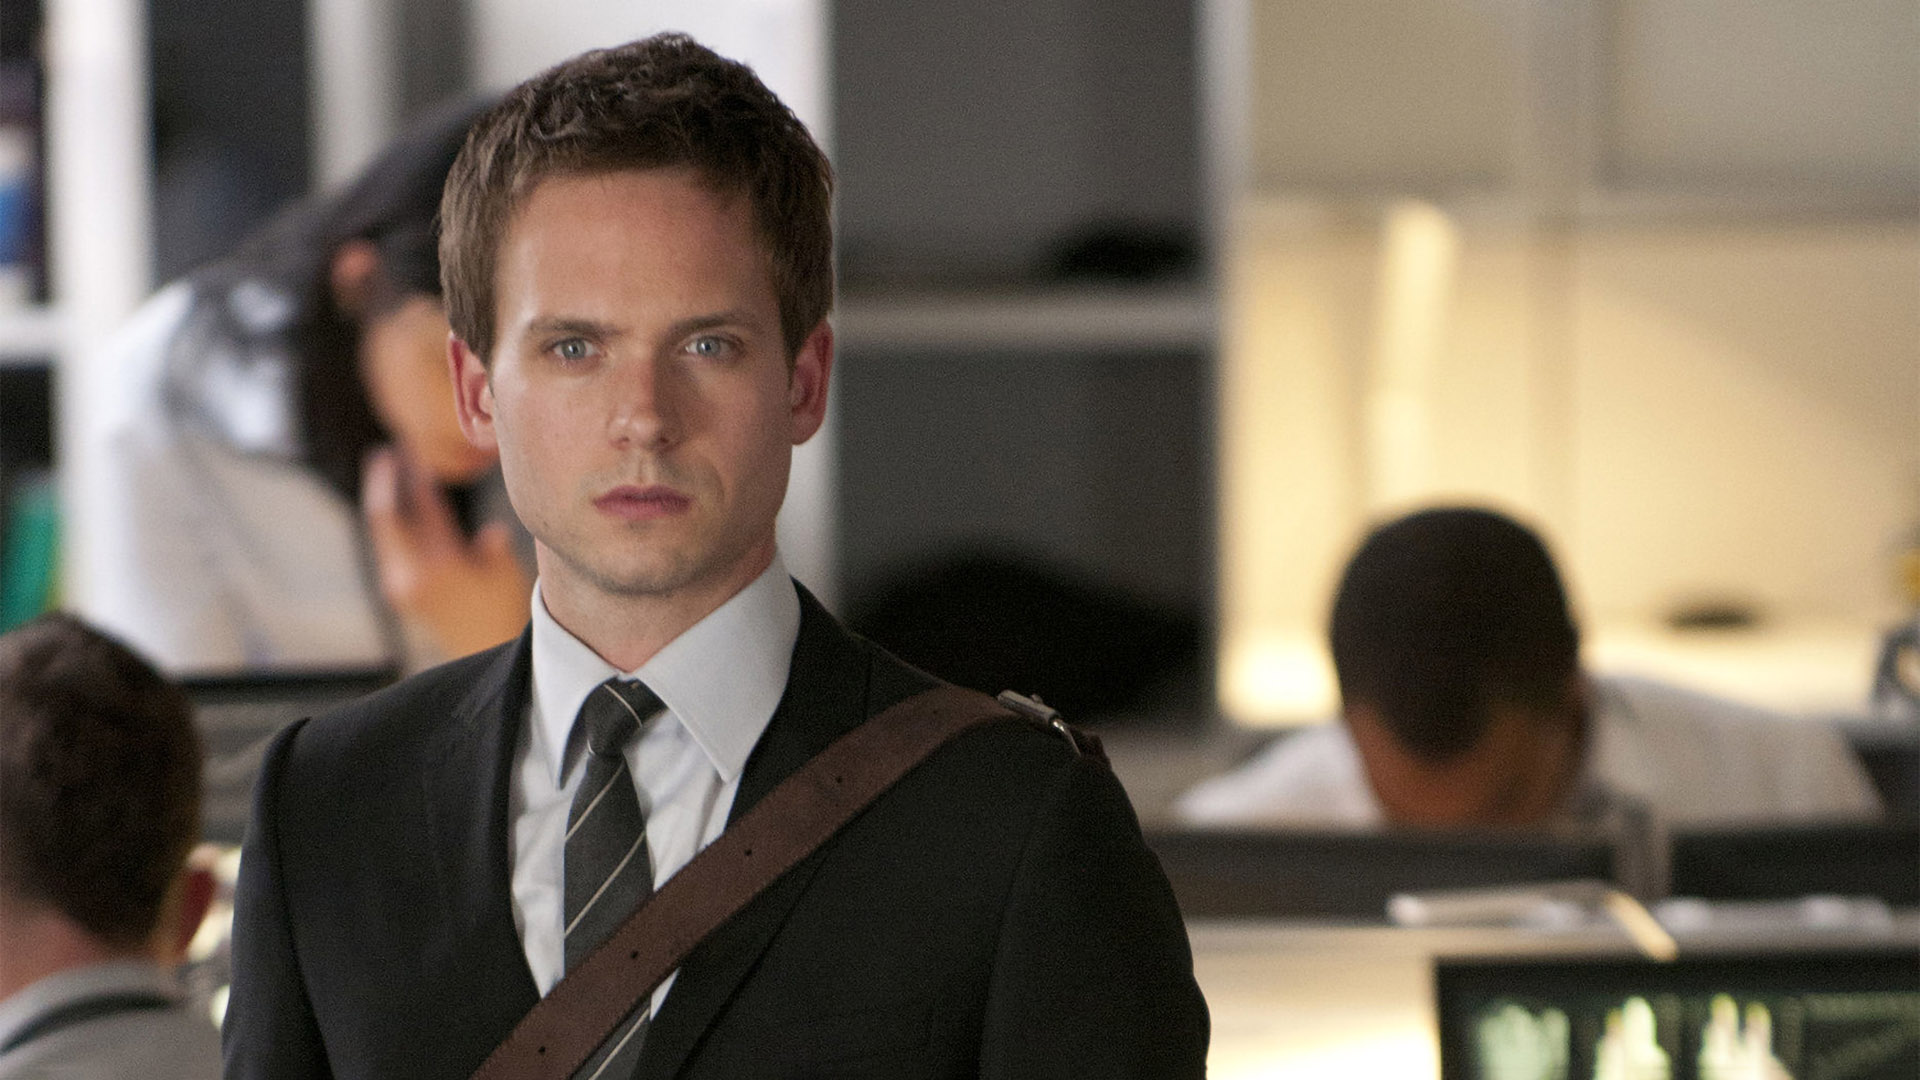 Was There Any Drama Behind Patrick J. Adams' Surprising Suits Exit?